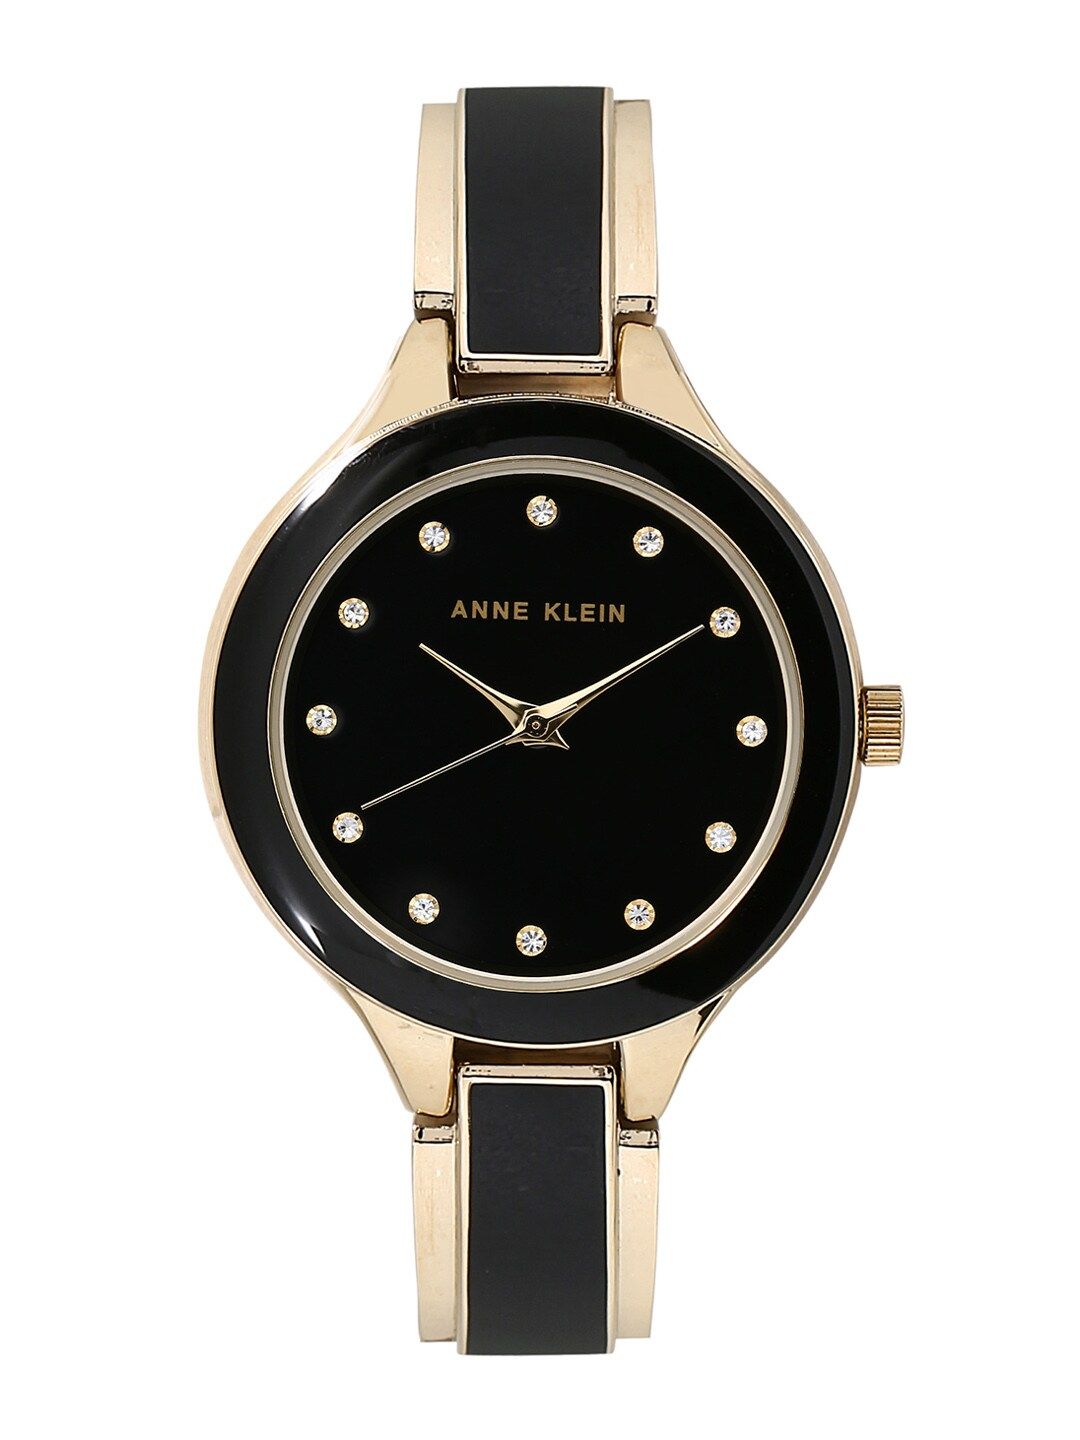 ANNE KLEIN Women Black & Gold-Toned Analogue Watch AK2934BKGB Price in India